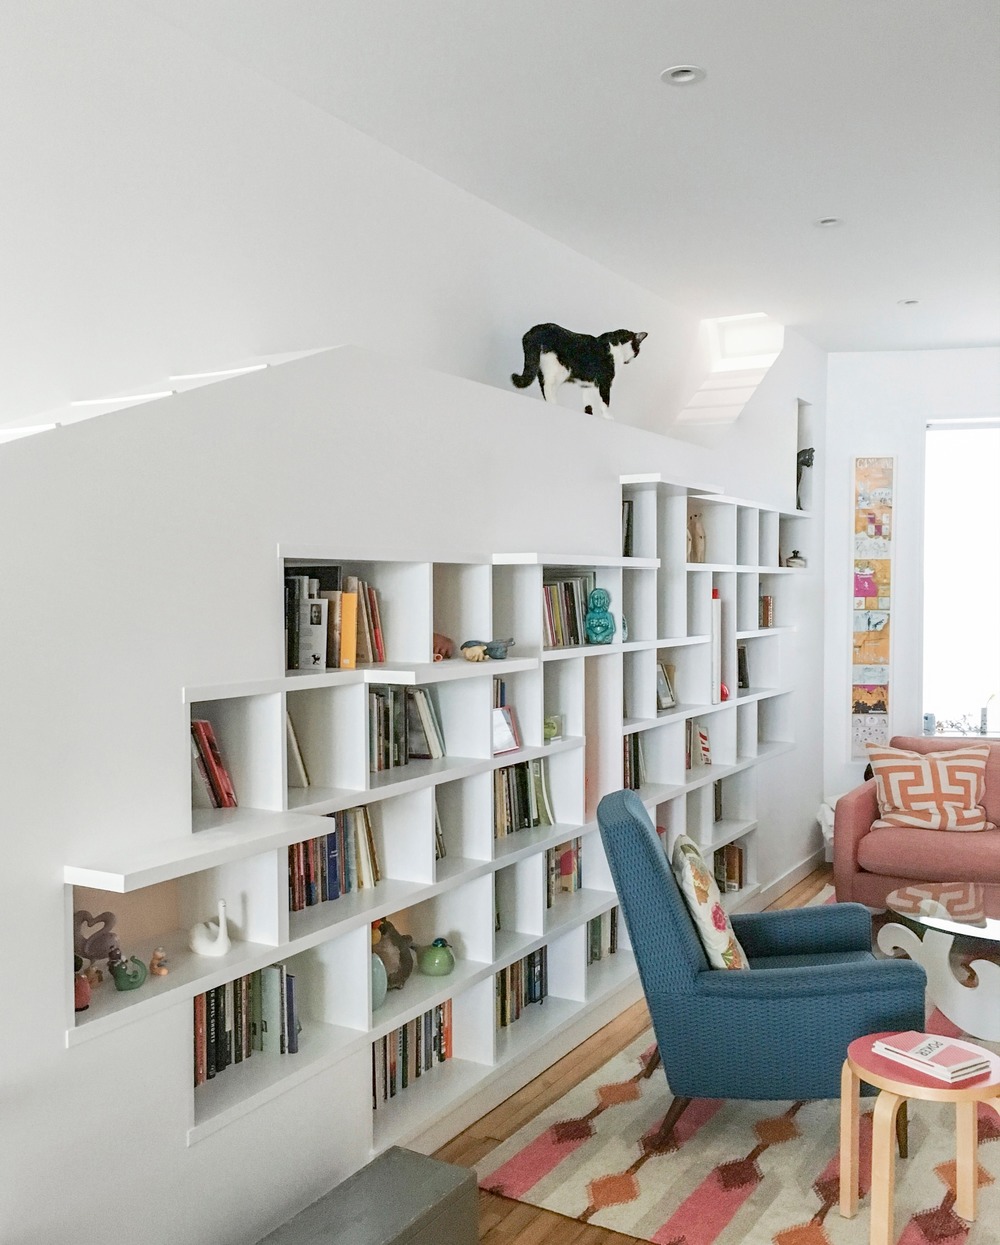 A cat walks along the bookshelf in this Brookly, NY home